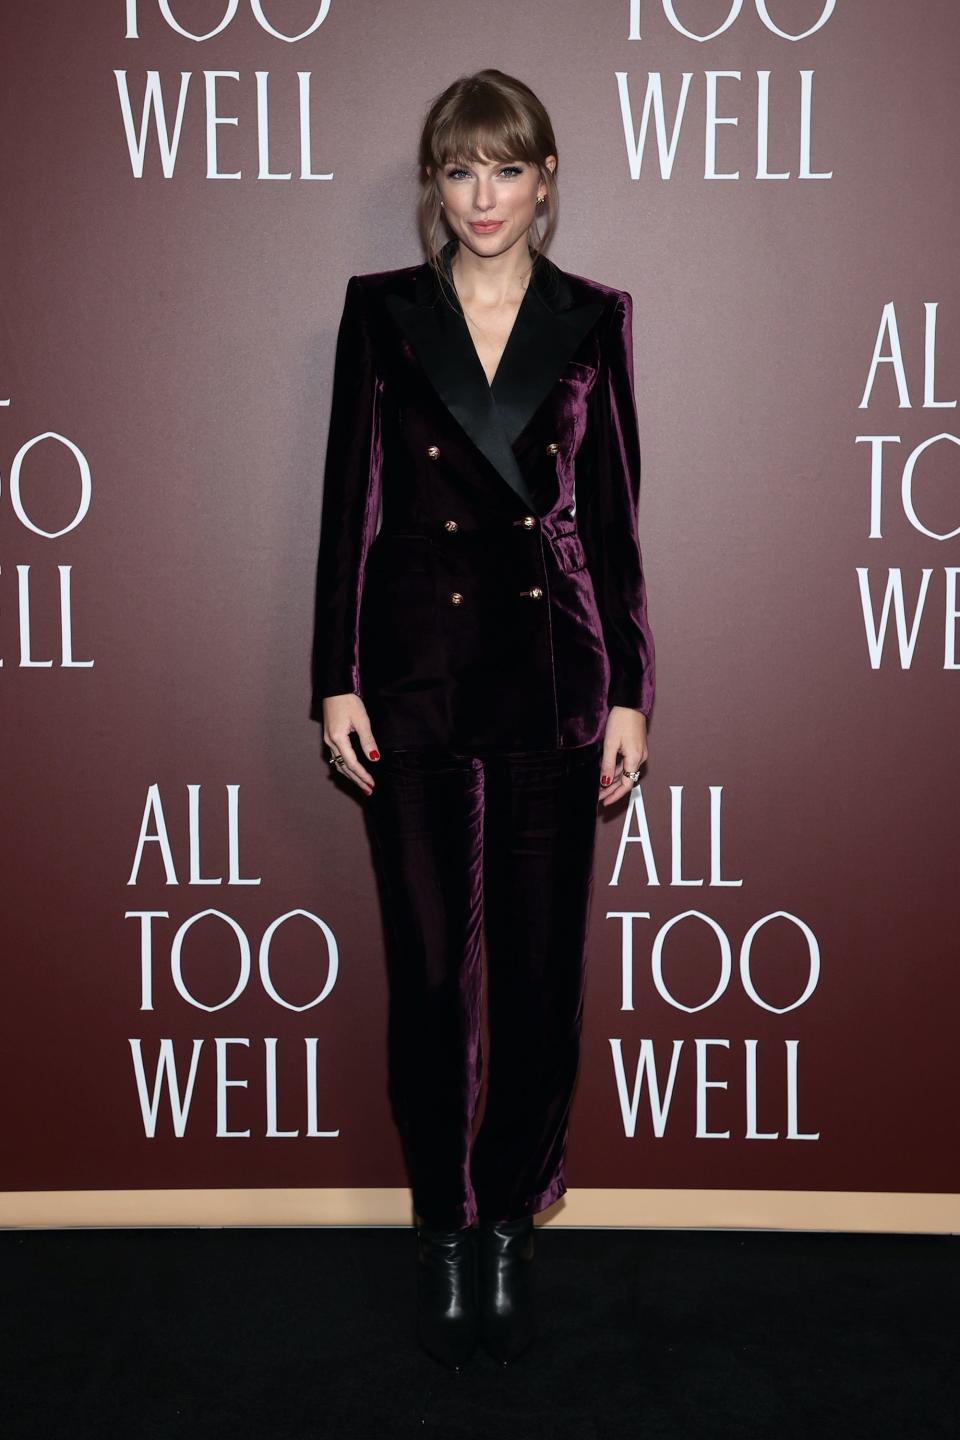 Taylor Swift wears a purple suit at the "All Too Well" short film premiere.